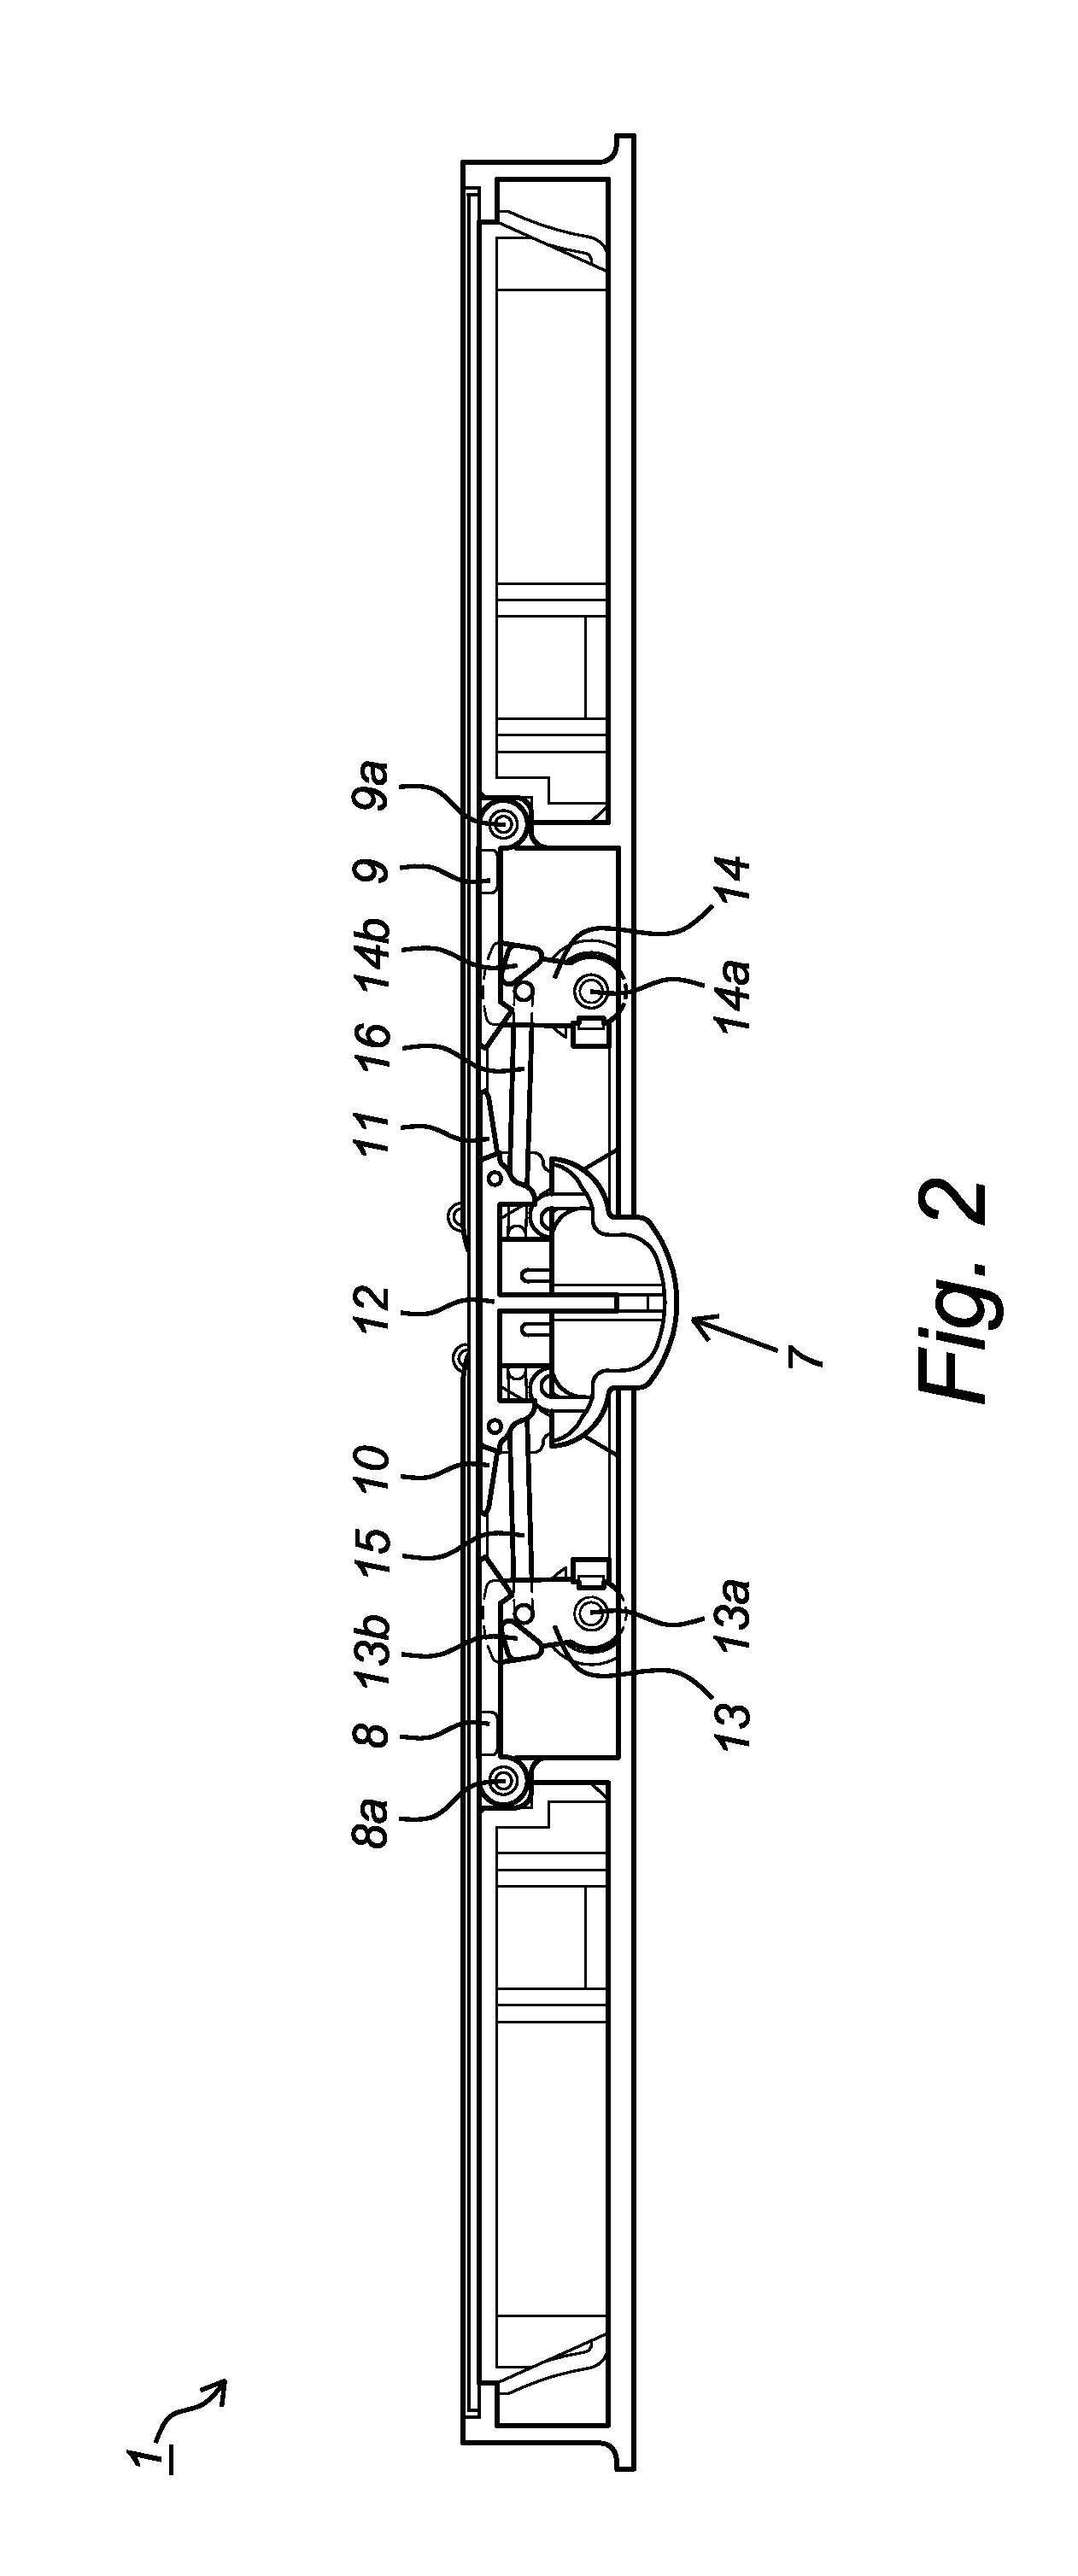 Display system with a flexible display